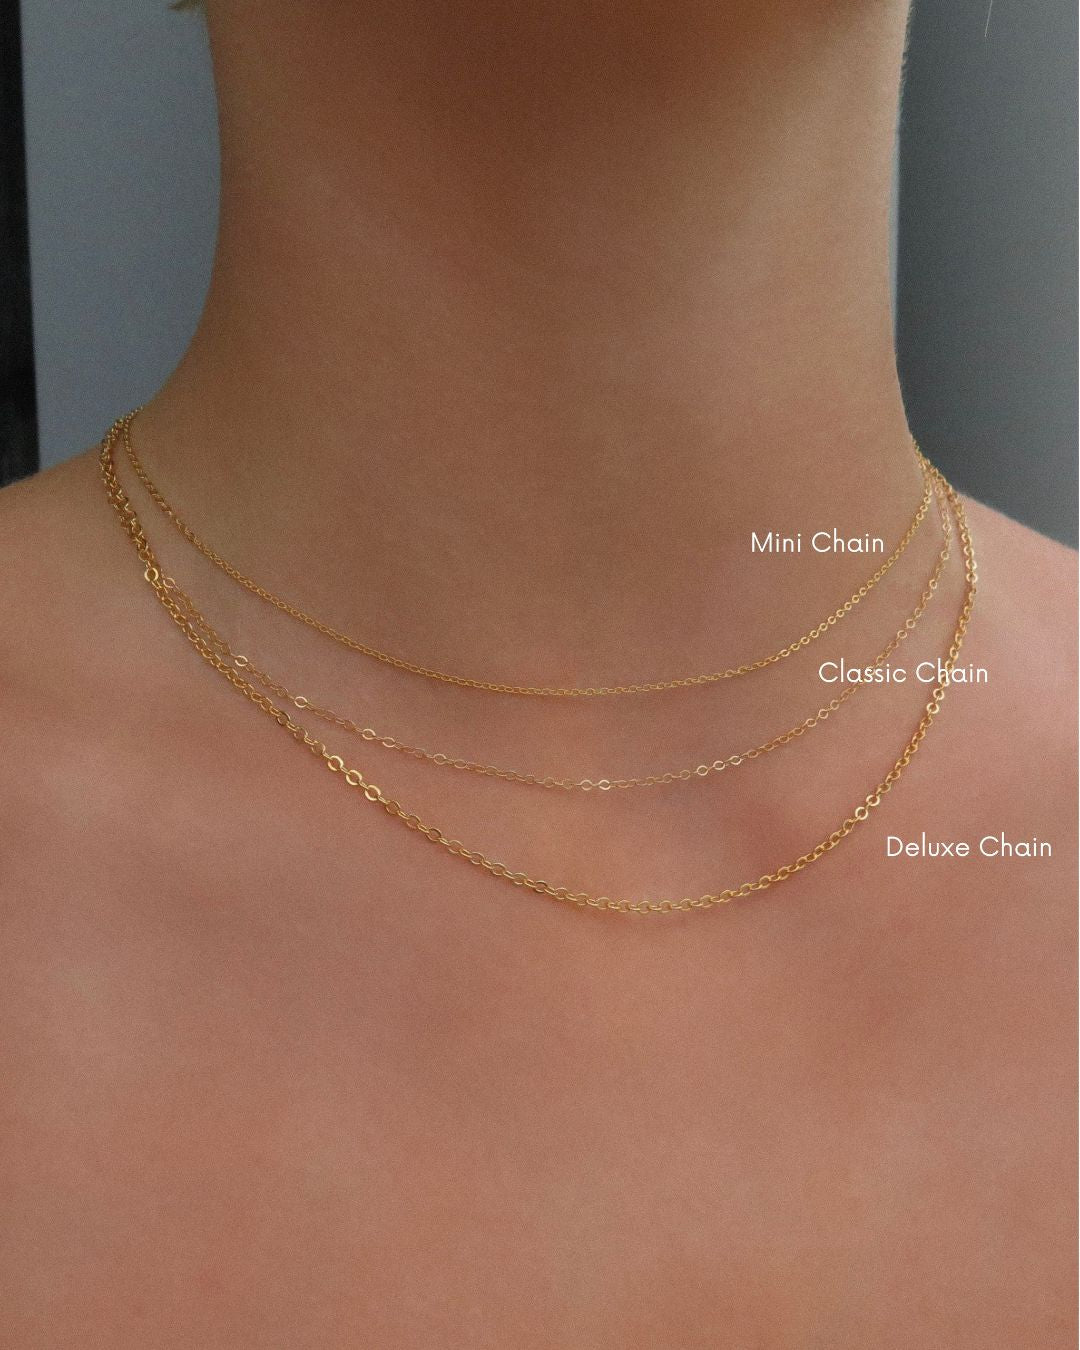 Seven Ring Necklace  - 14k Yellow Gold Fill